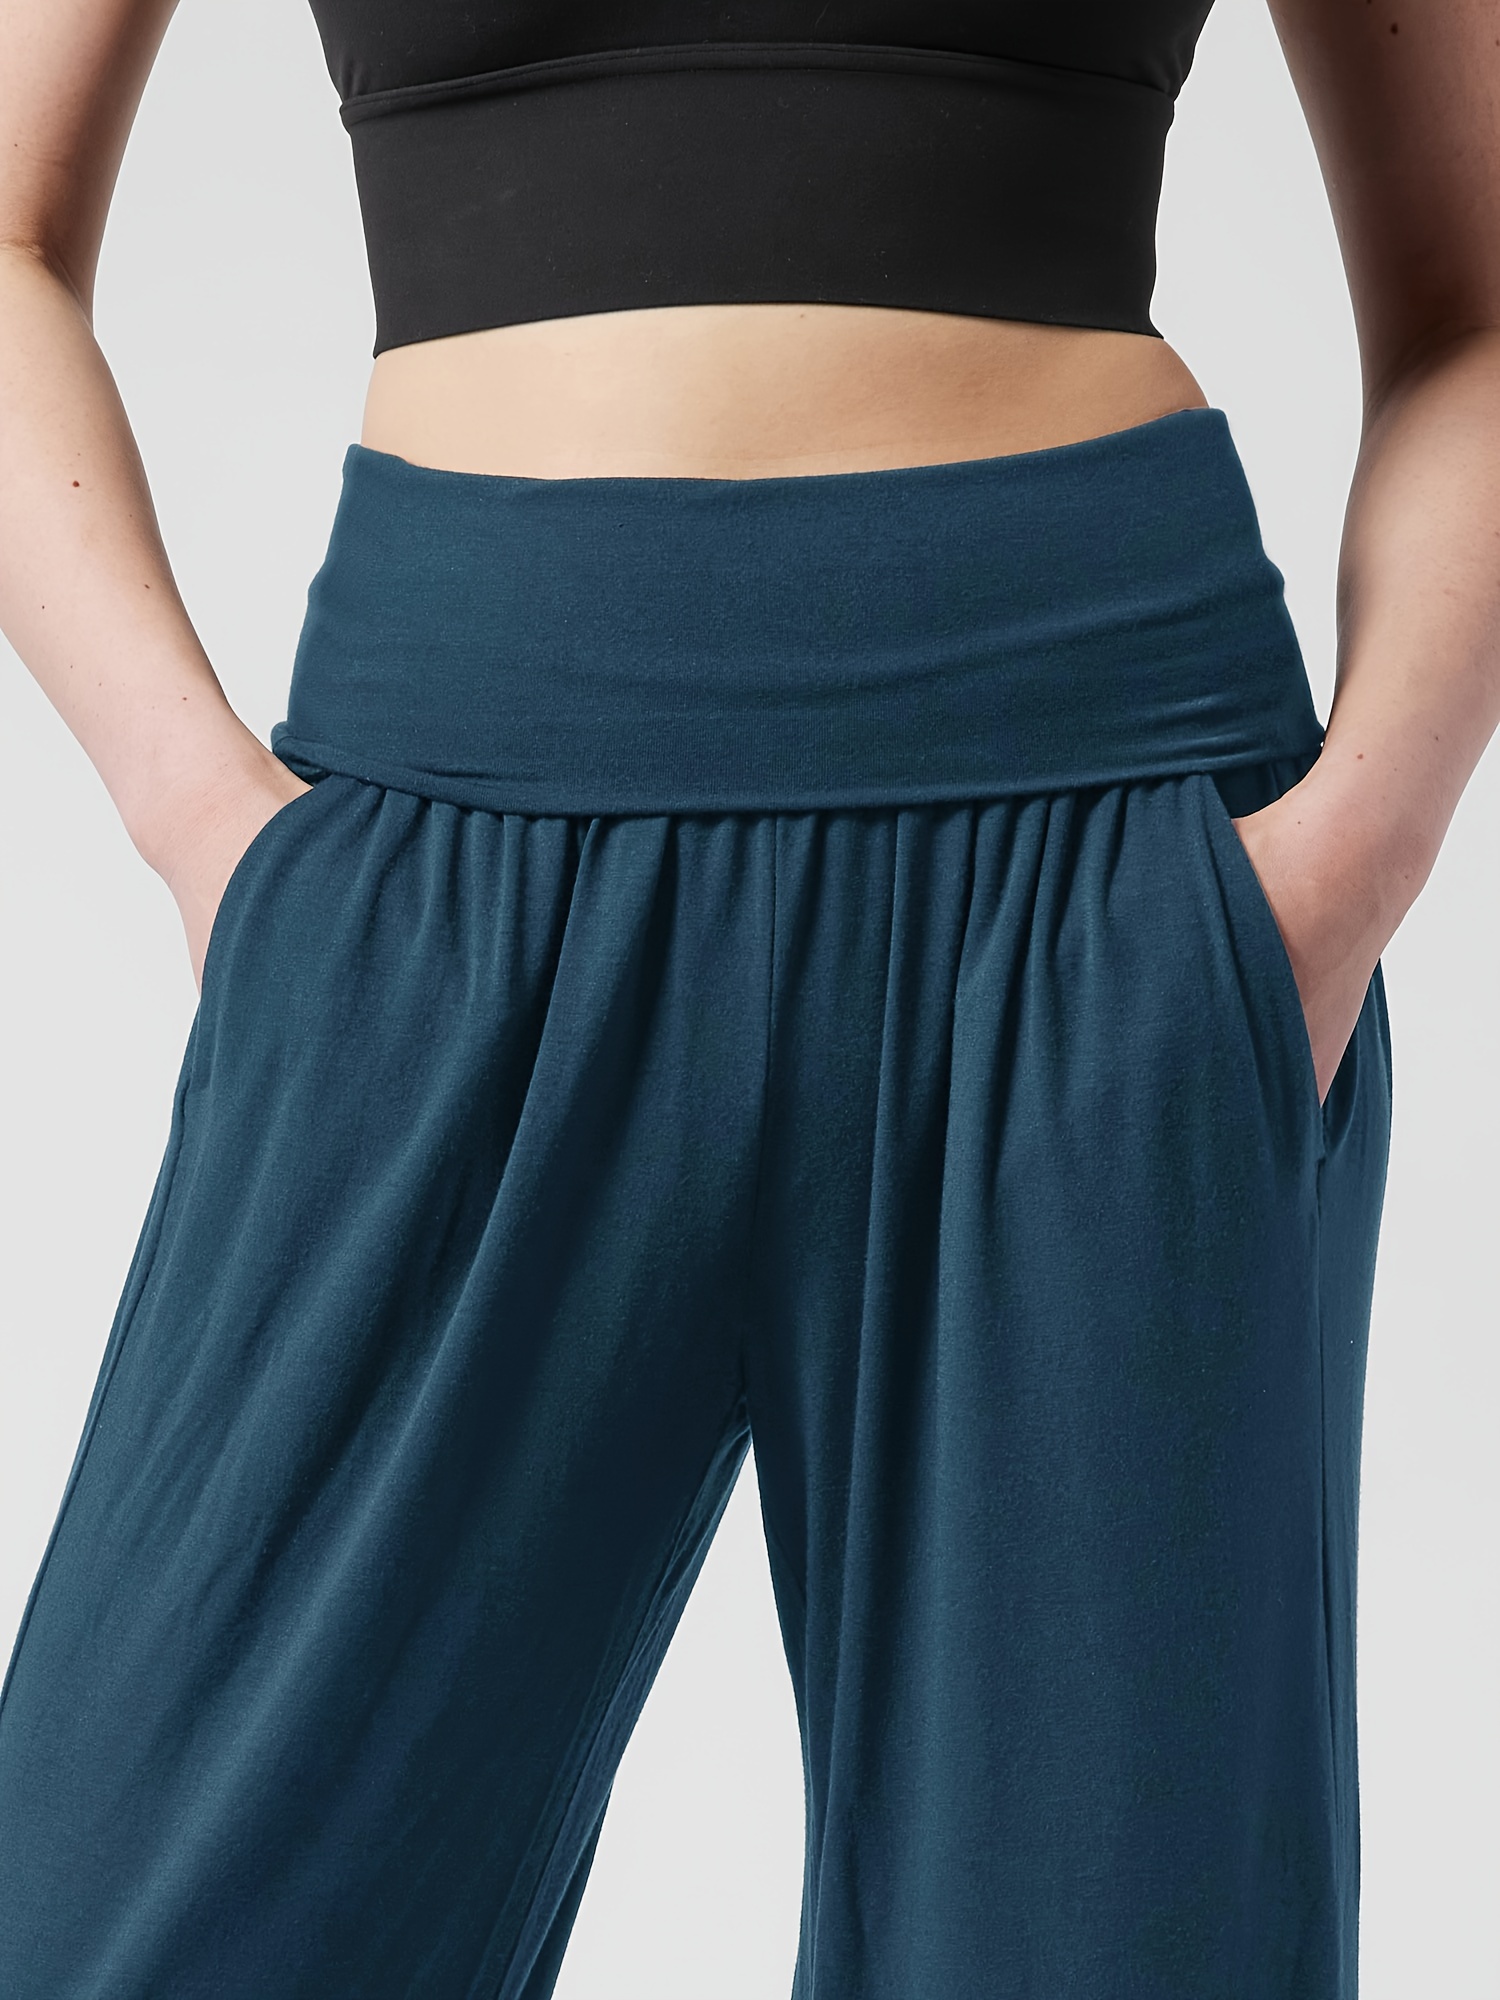 Wide Leg Pants for Women Women Workout Out Leggings Fitness Sports Running Yoga  Athletic Pants 